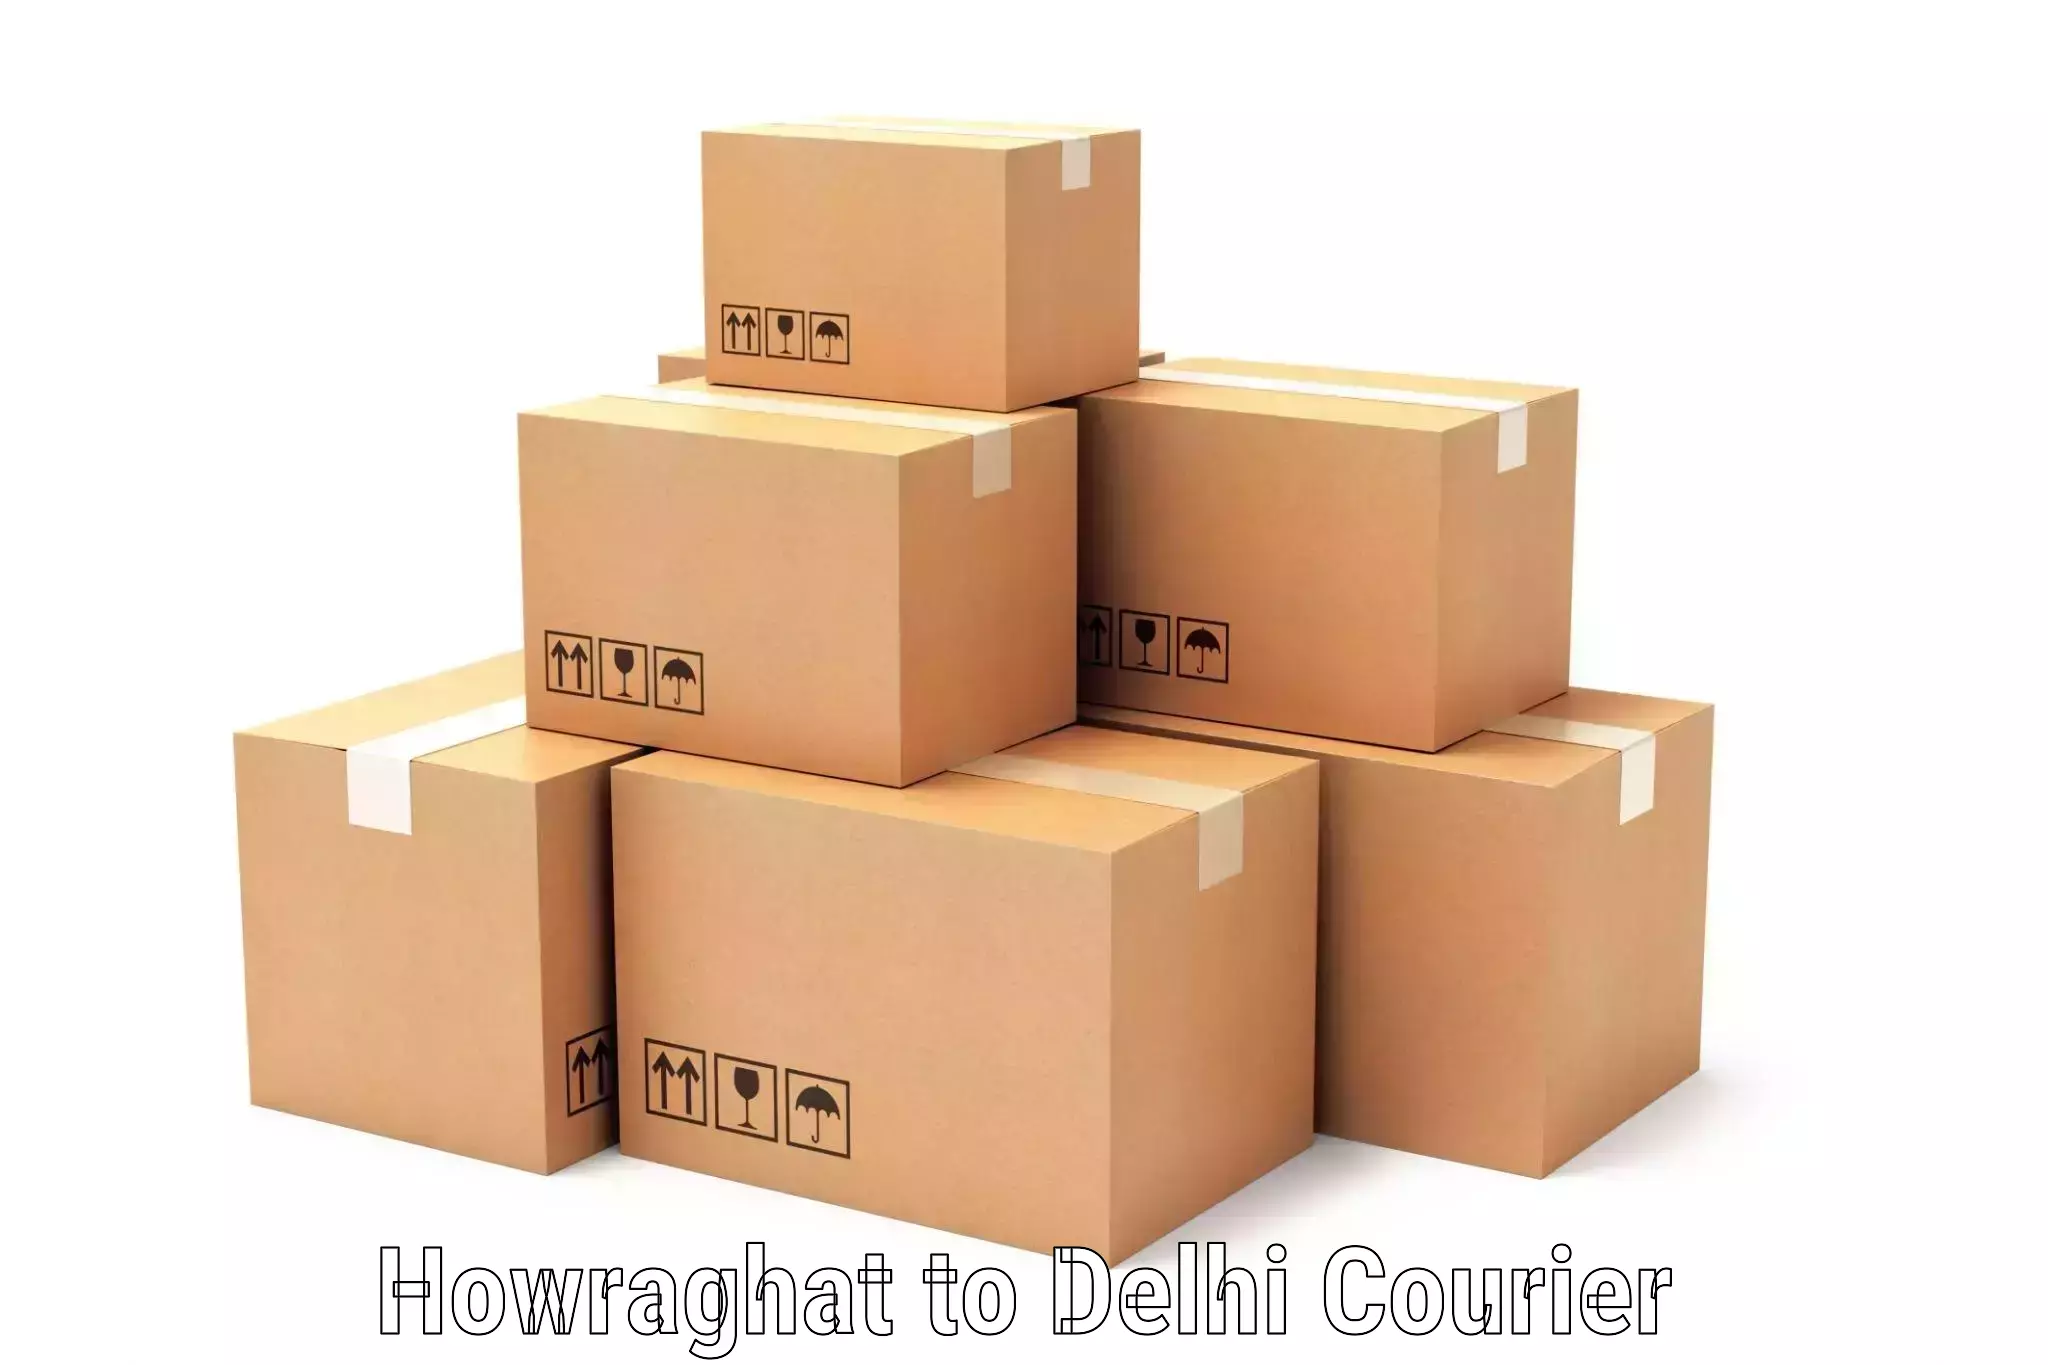 Efficient shipping operations in Howraghat to University of Delhi